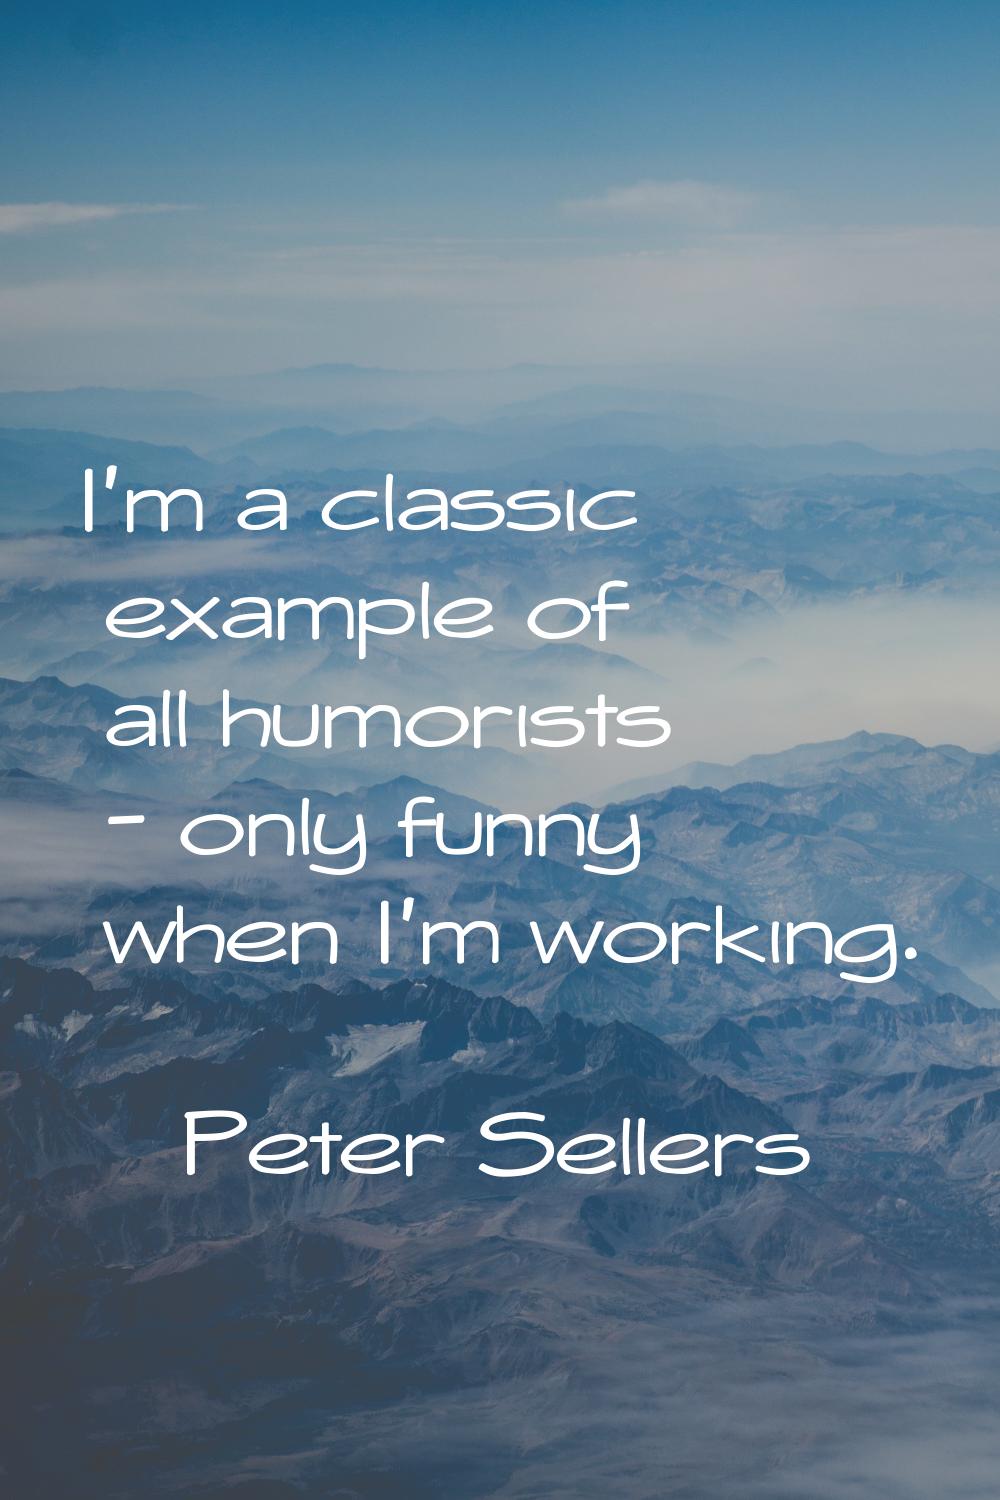 I'm a classic example of all humorists - only funny when I'm working.